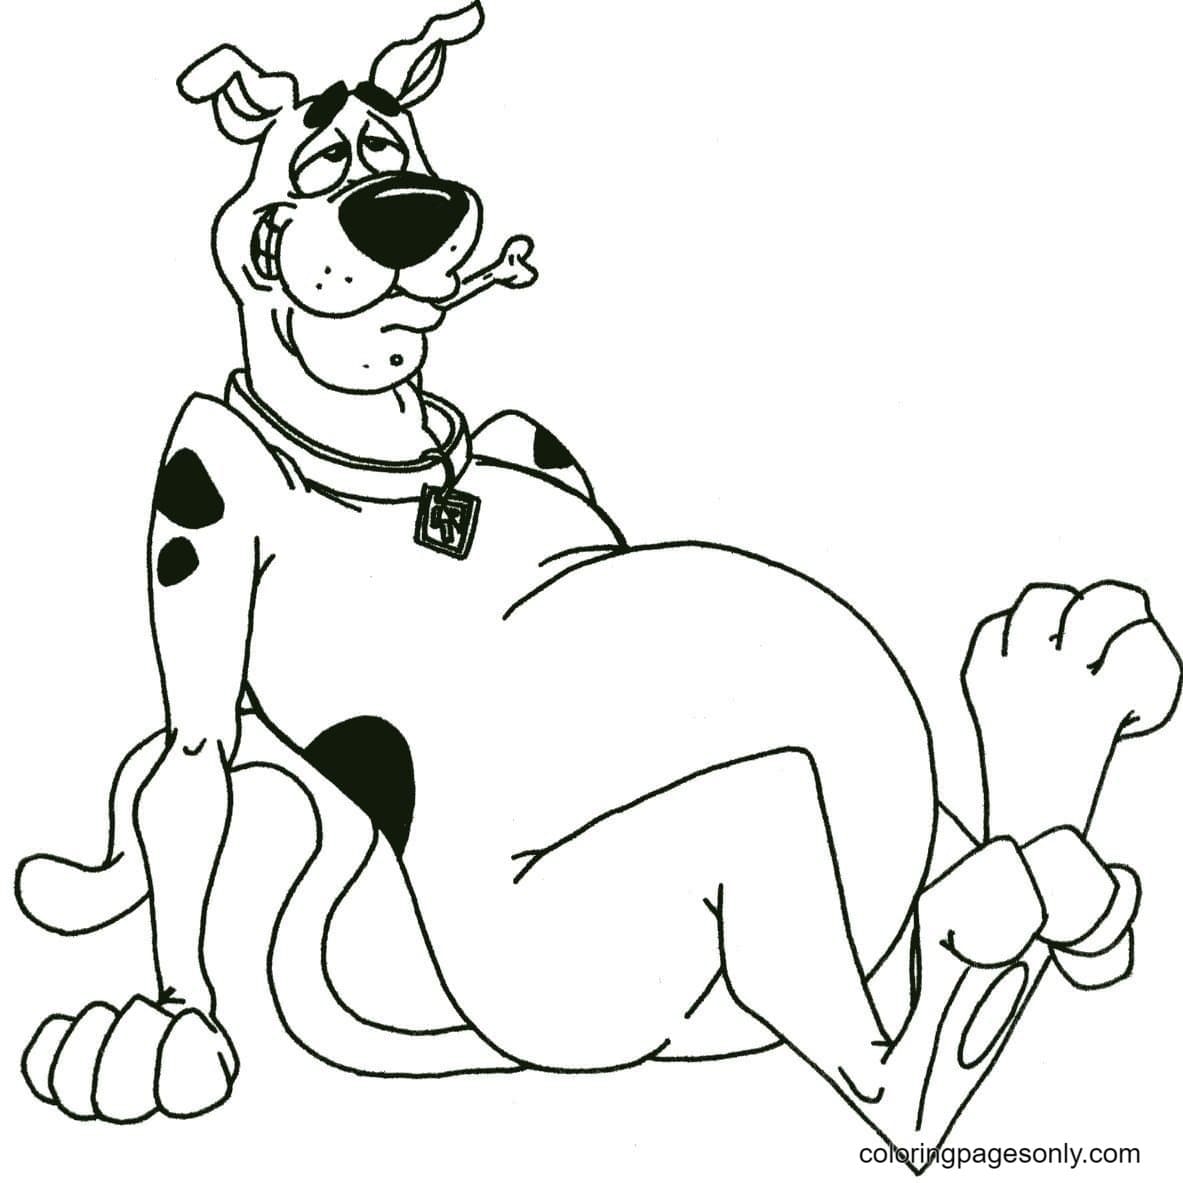 When Scooby Doo had a thick supper Coloring Page